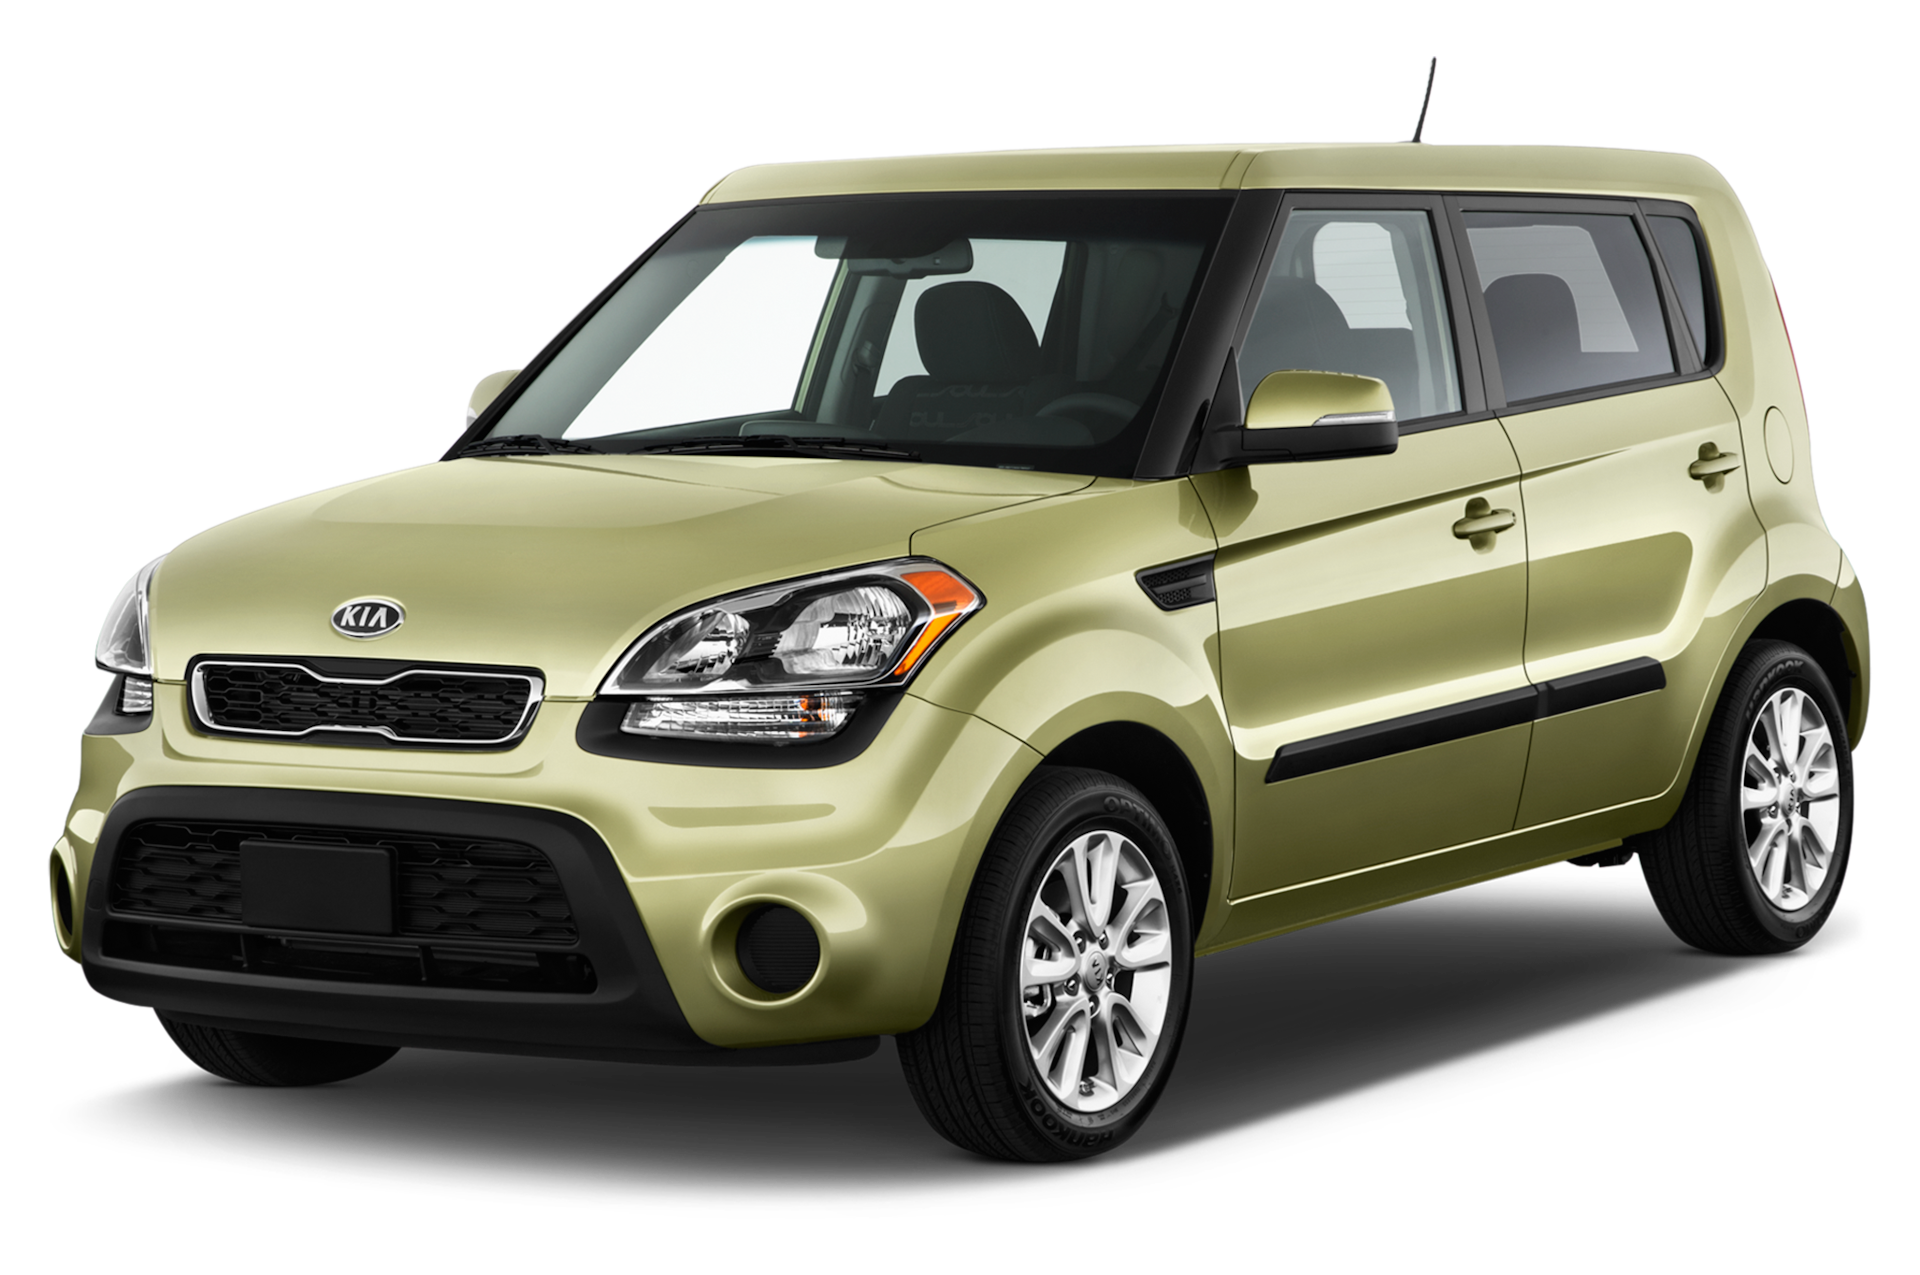 2013 Kia Soul Prices, Reviews, and Photos - MotorTrend